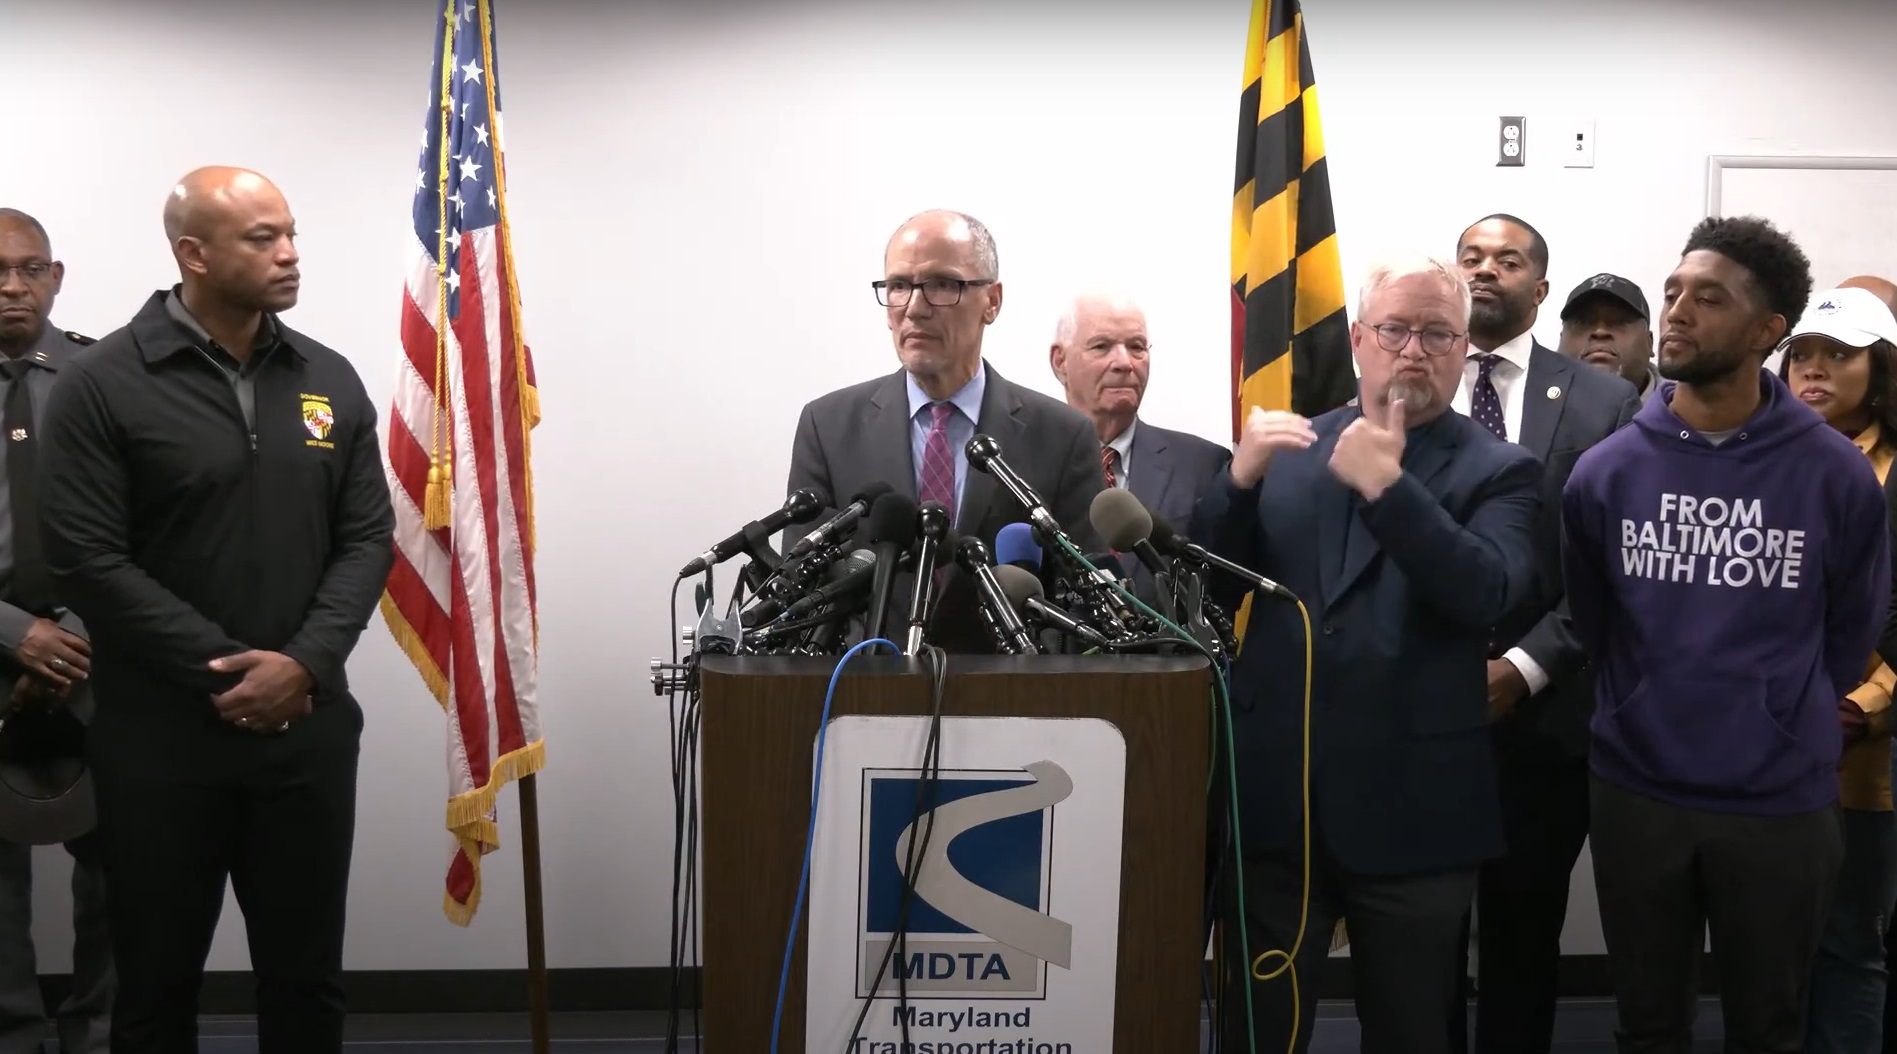 Tom Perez says President Biden will work 'hand in glove' with state to respond to bridge collapse